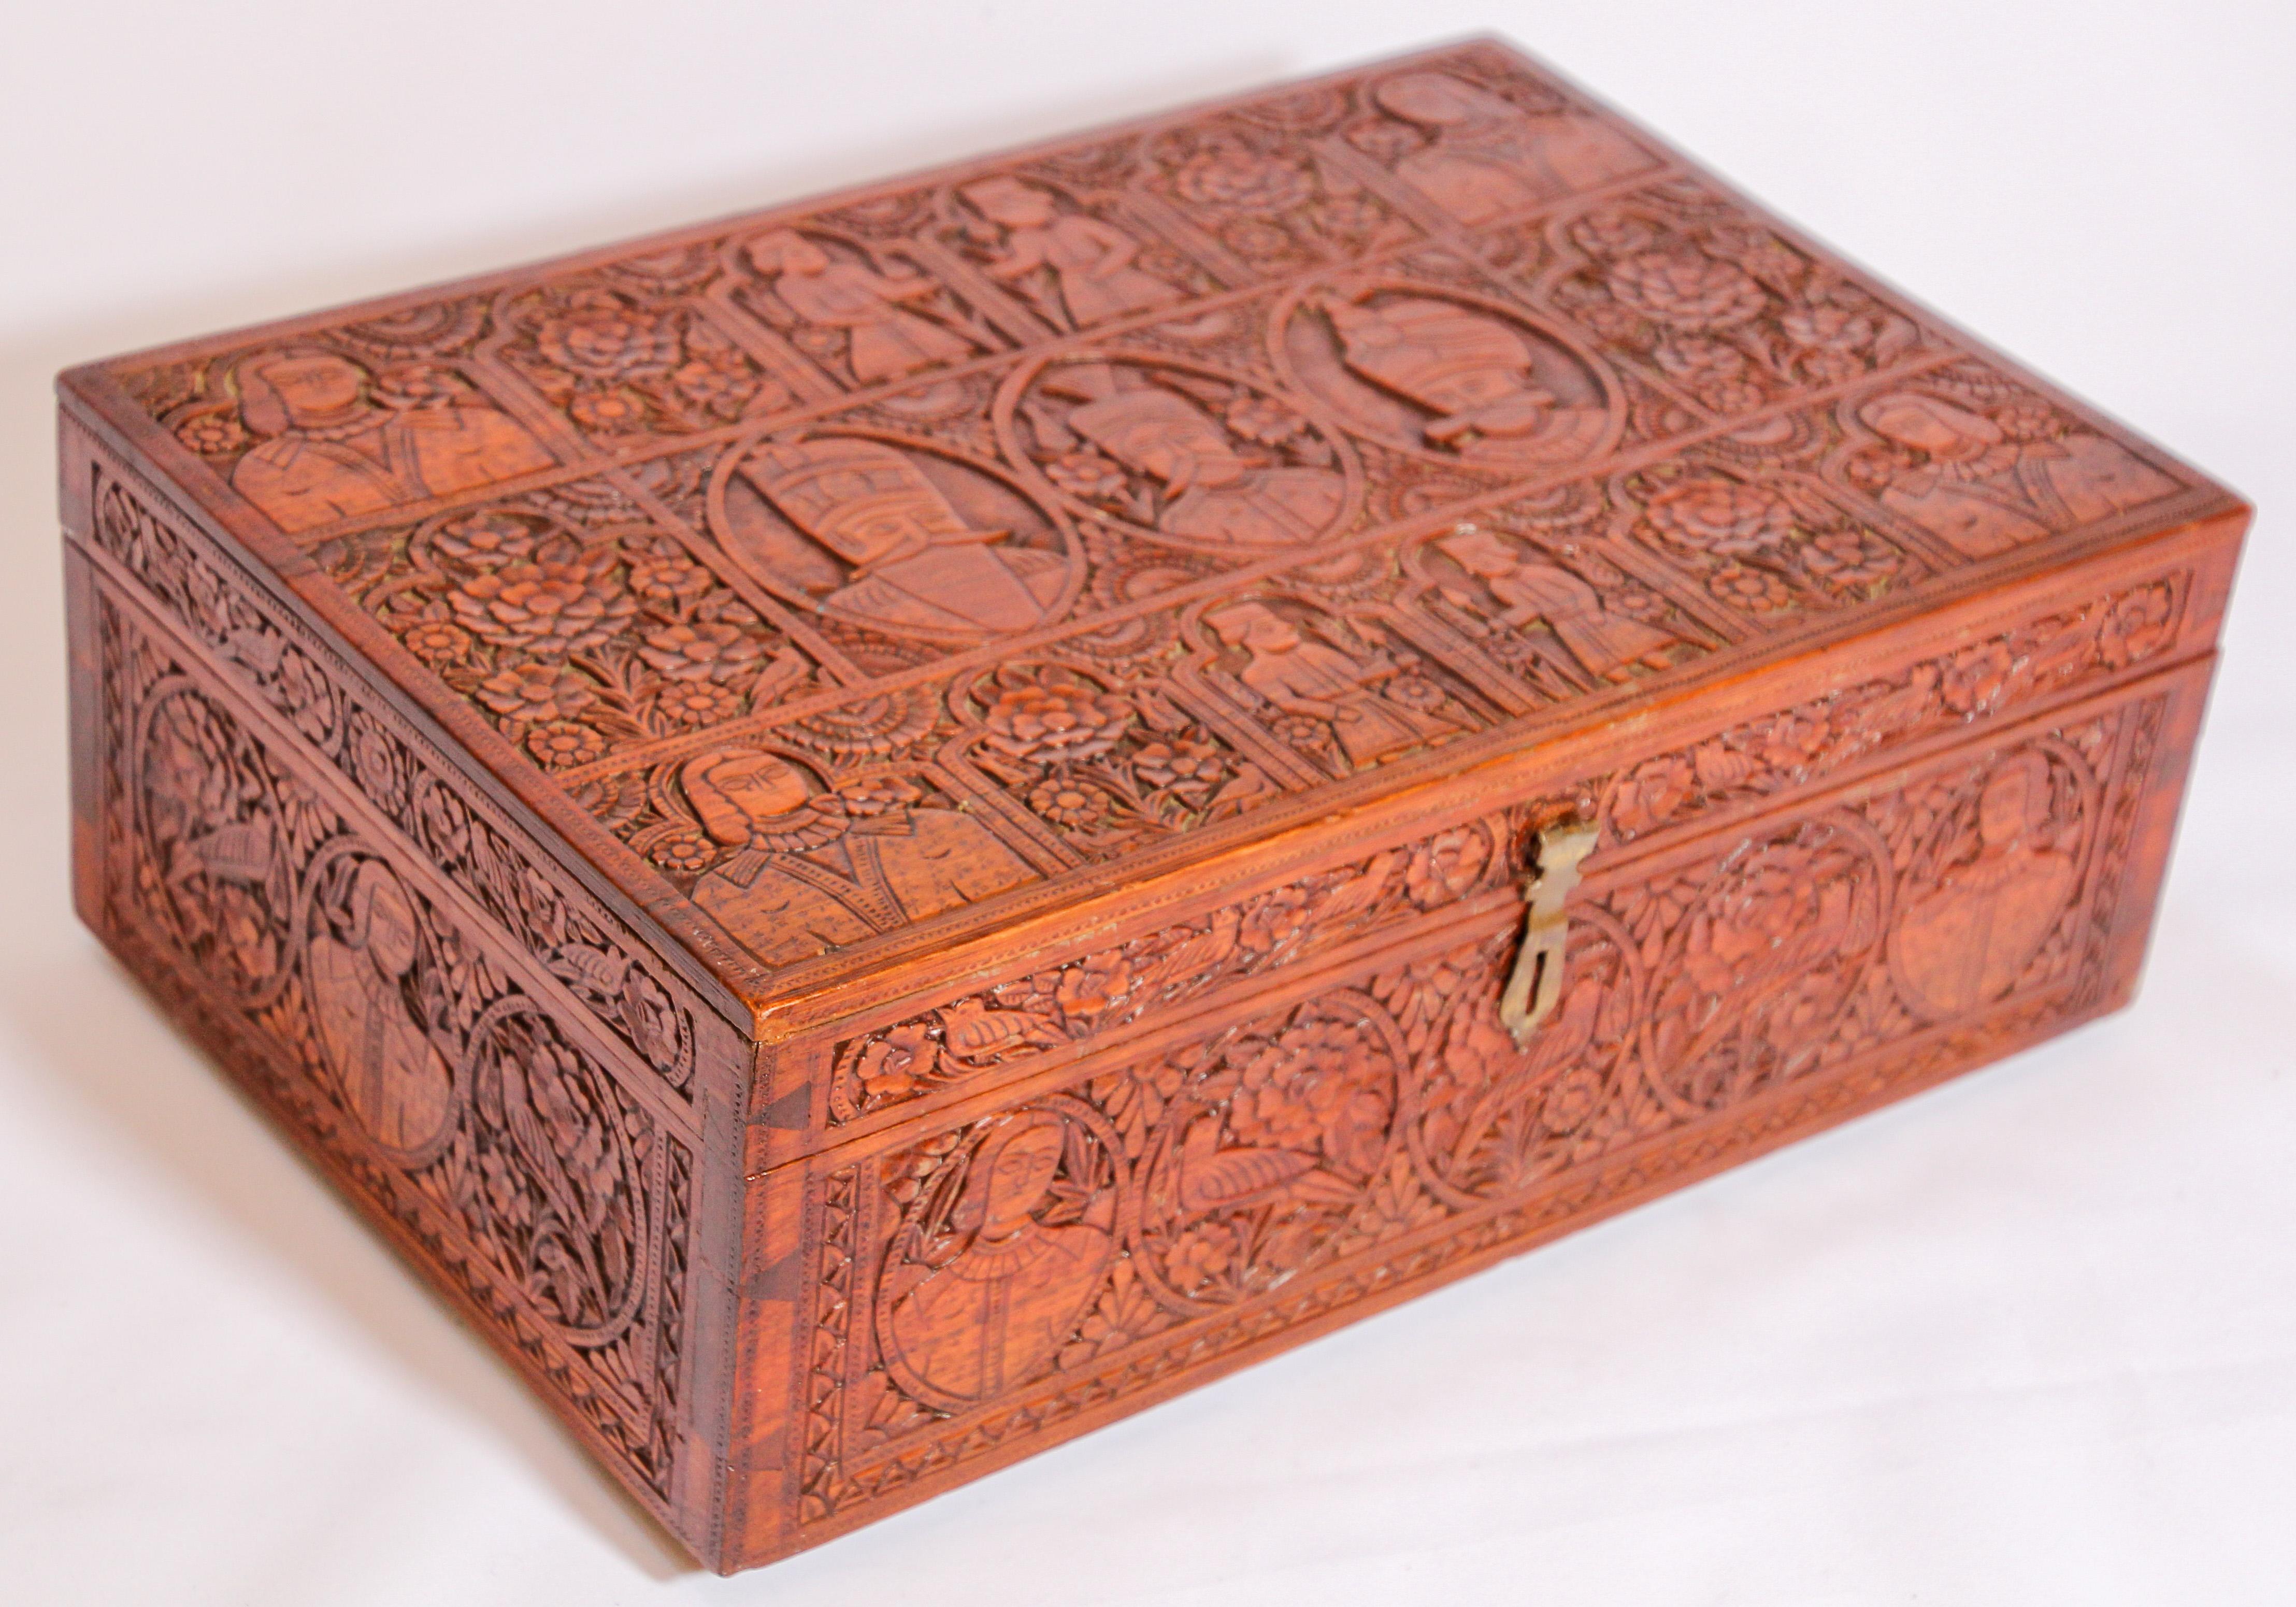 Large Early 19th Century Antique Hand Carved Wooden Mughal Decorative Box For Sale 3